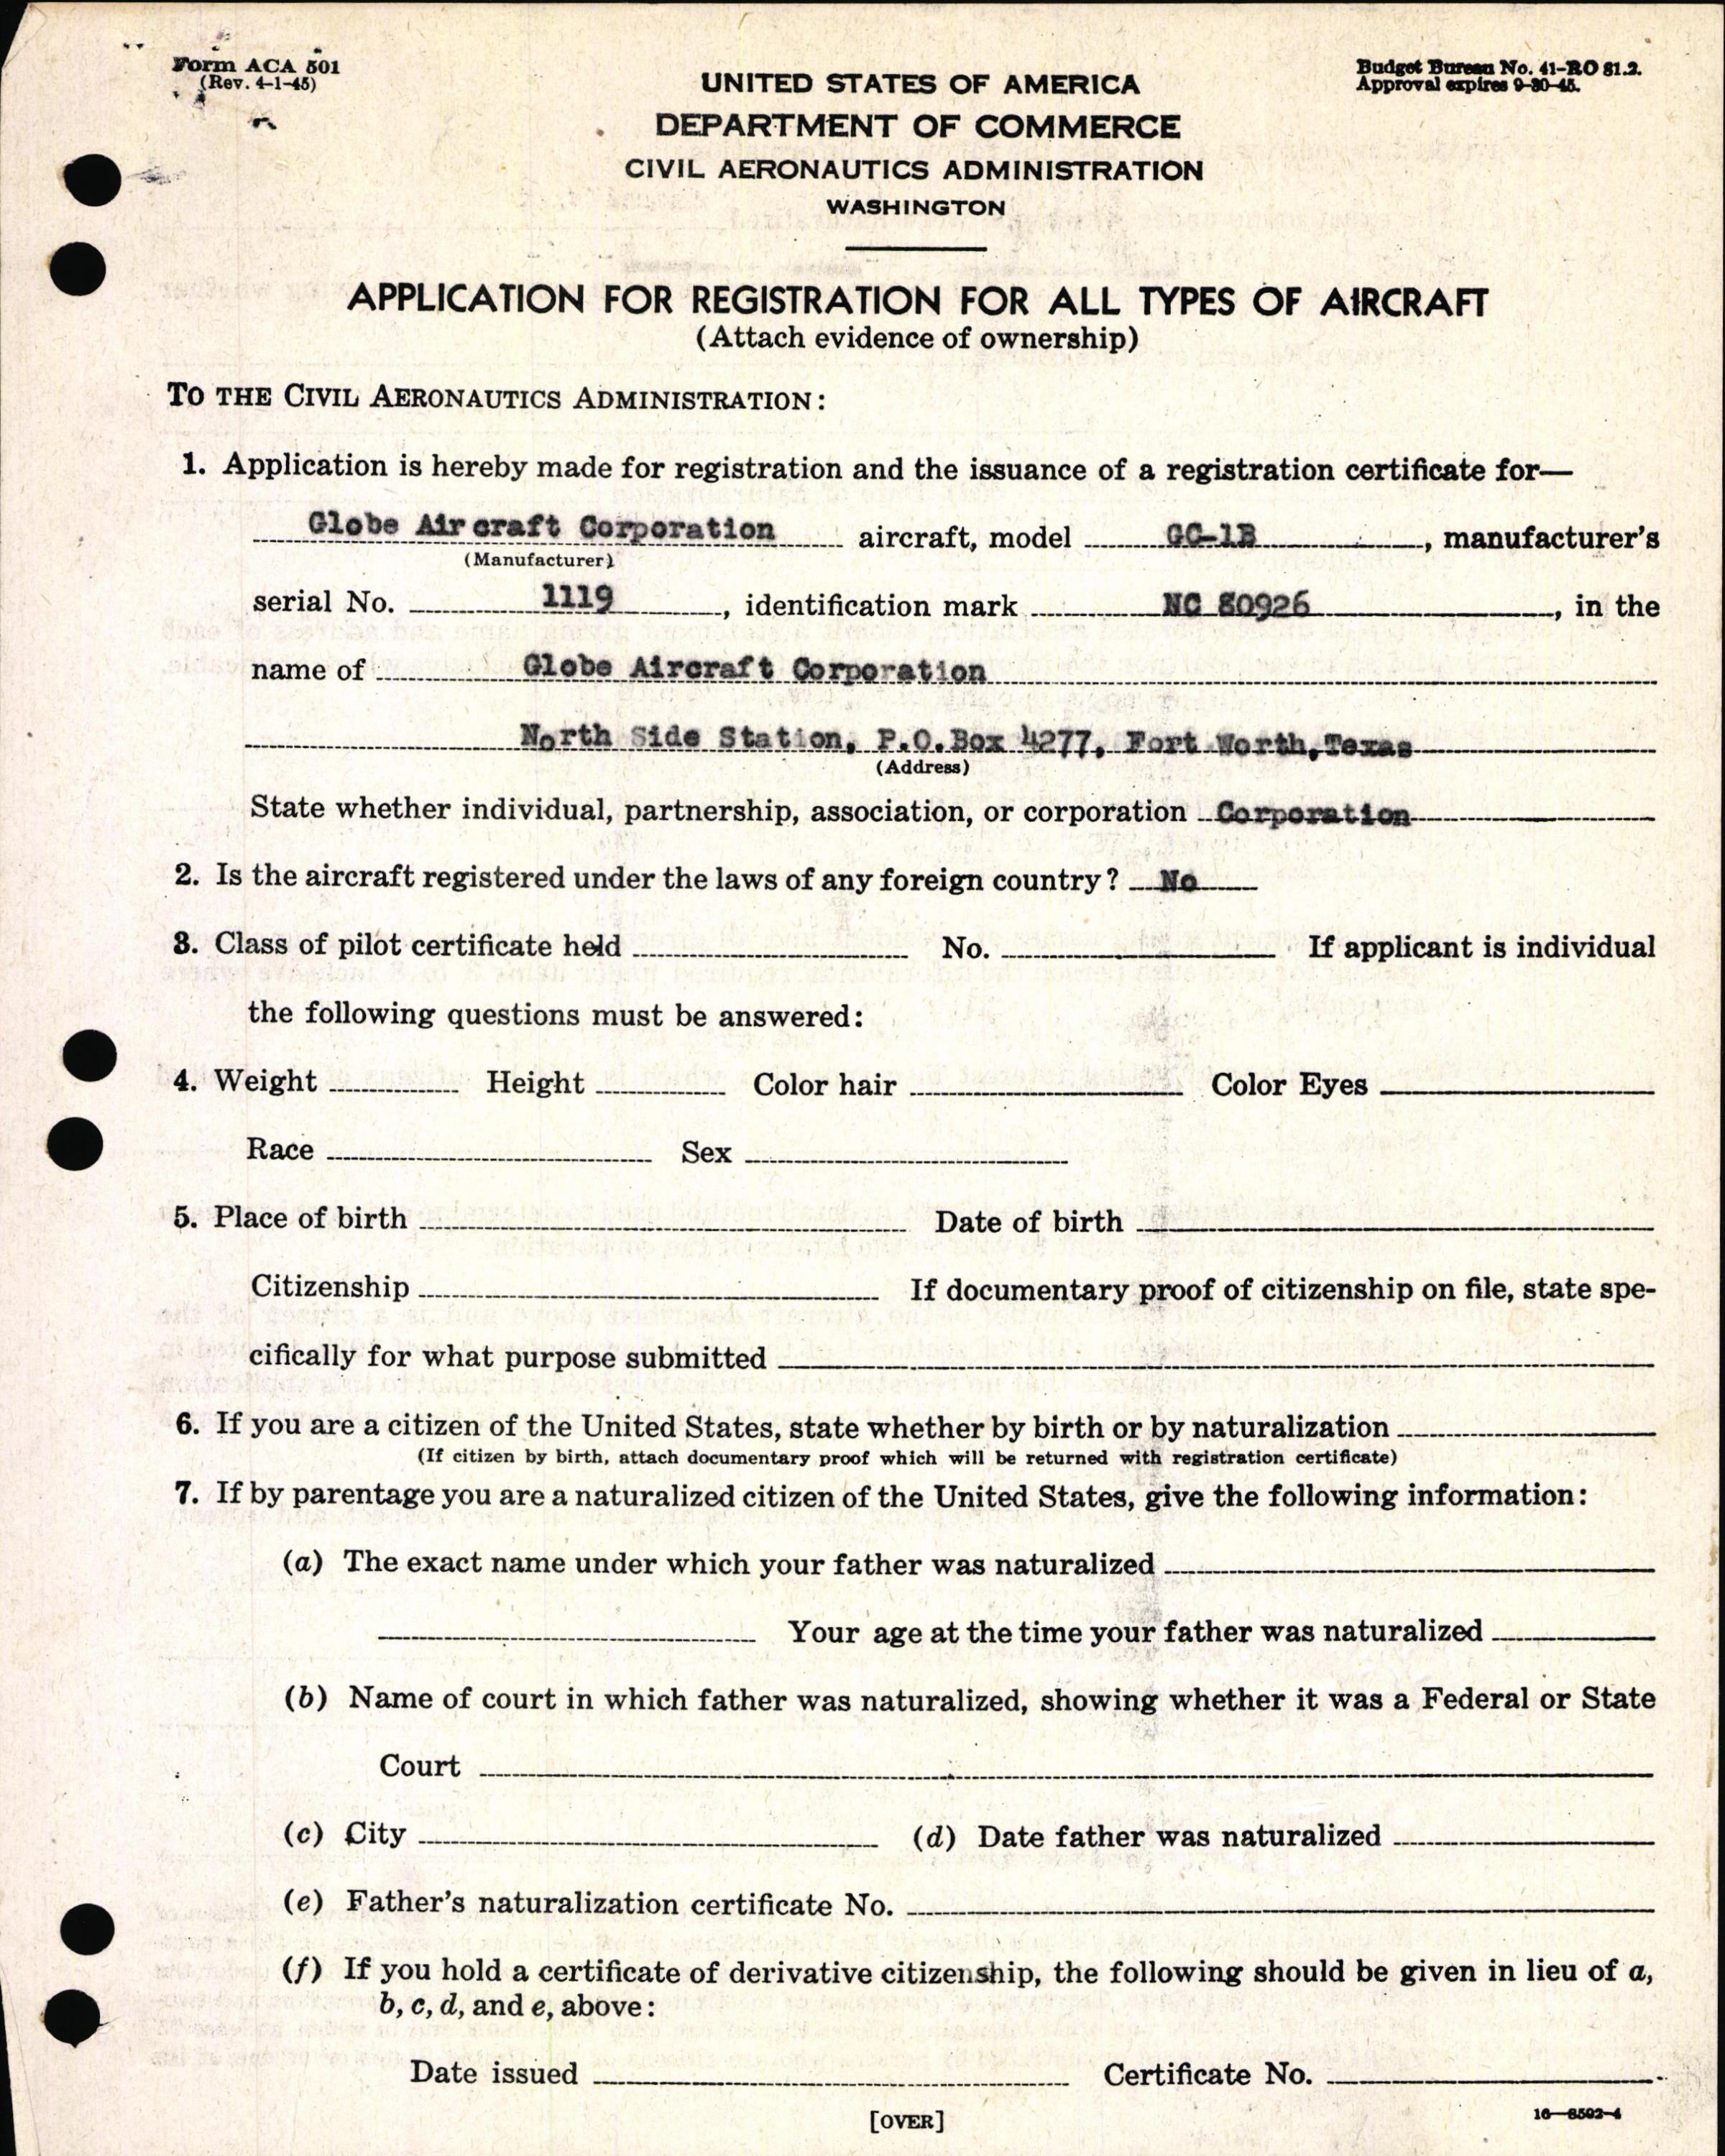 Sample page 3 from AirCorps Library document: Technical Information for Serial Number 1119